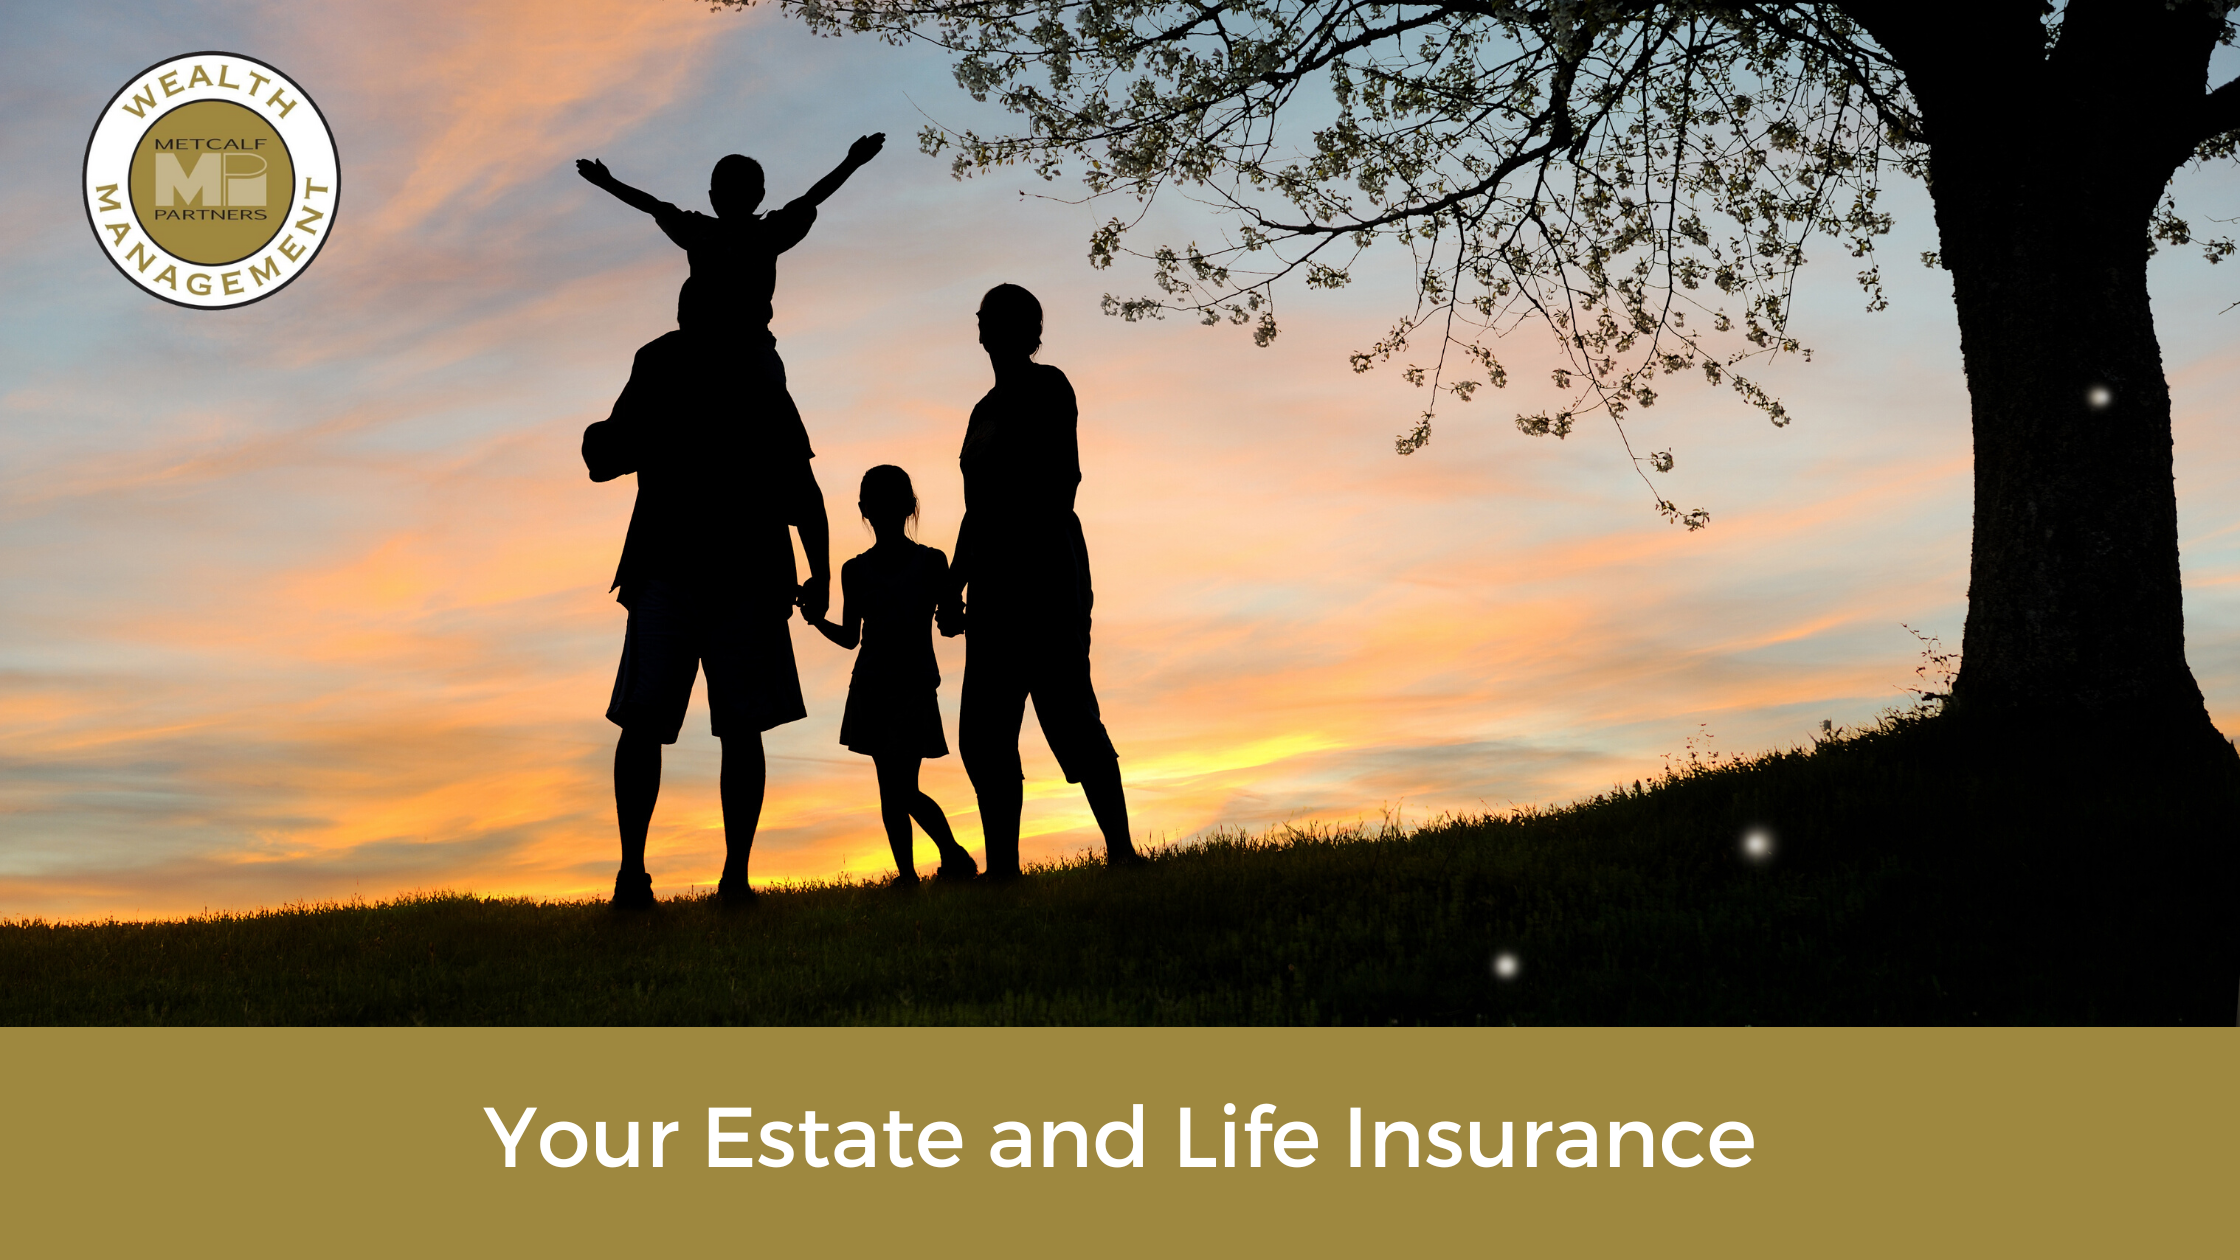 Featured image for “Your Estate and Life Insurance”